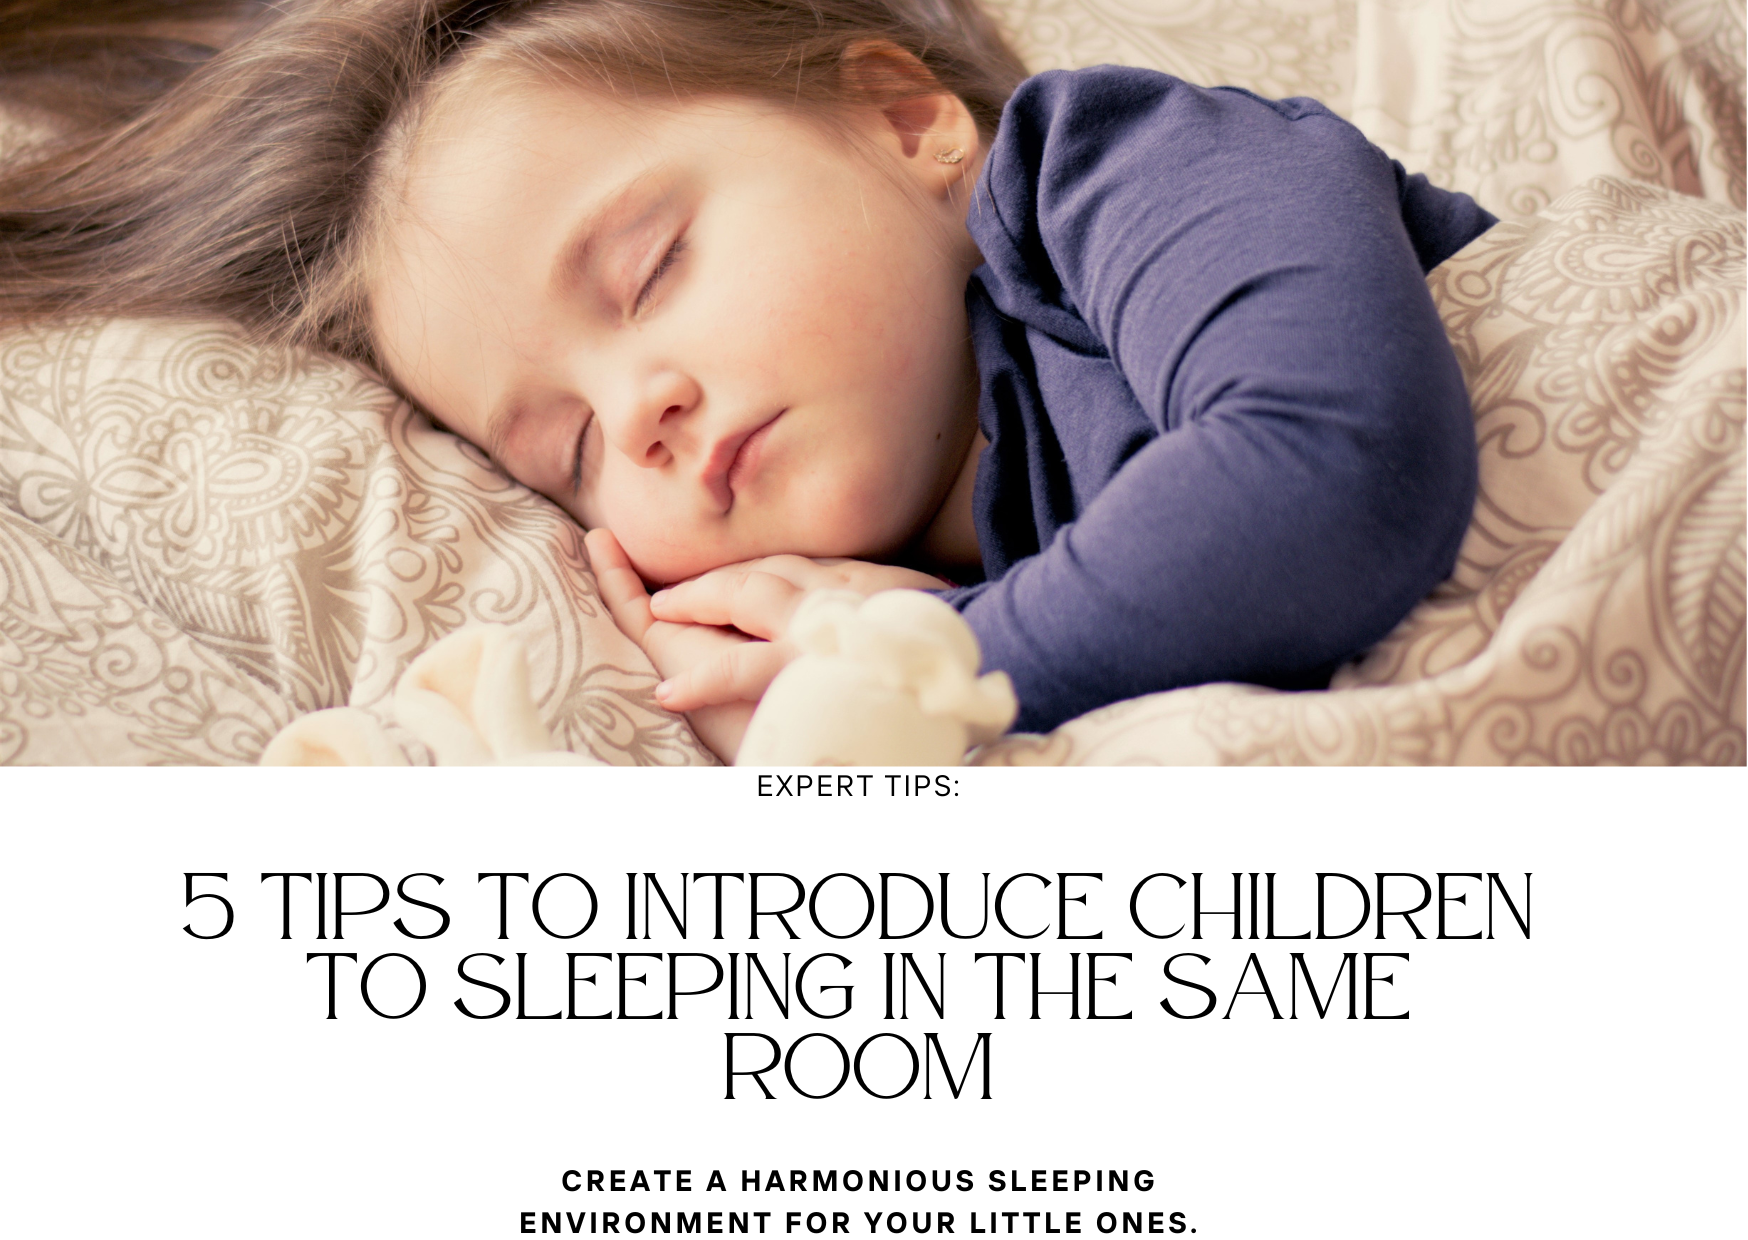 5 Tips To Introduce Children To Sleeping In The Same Room